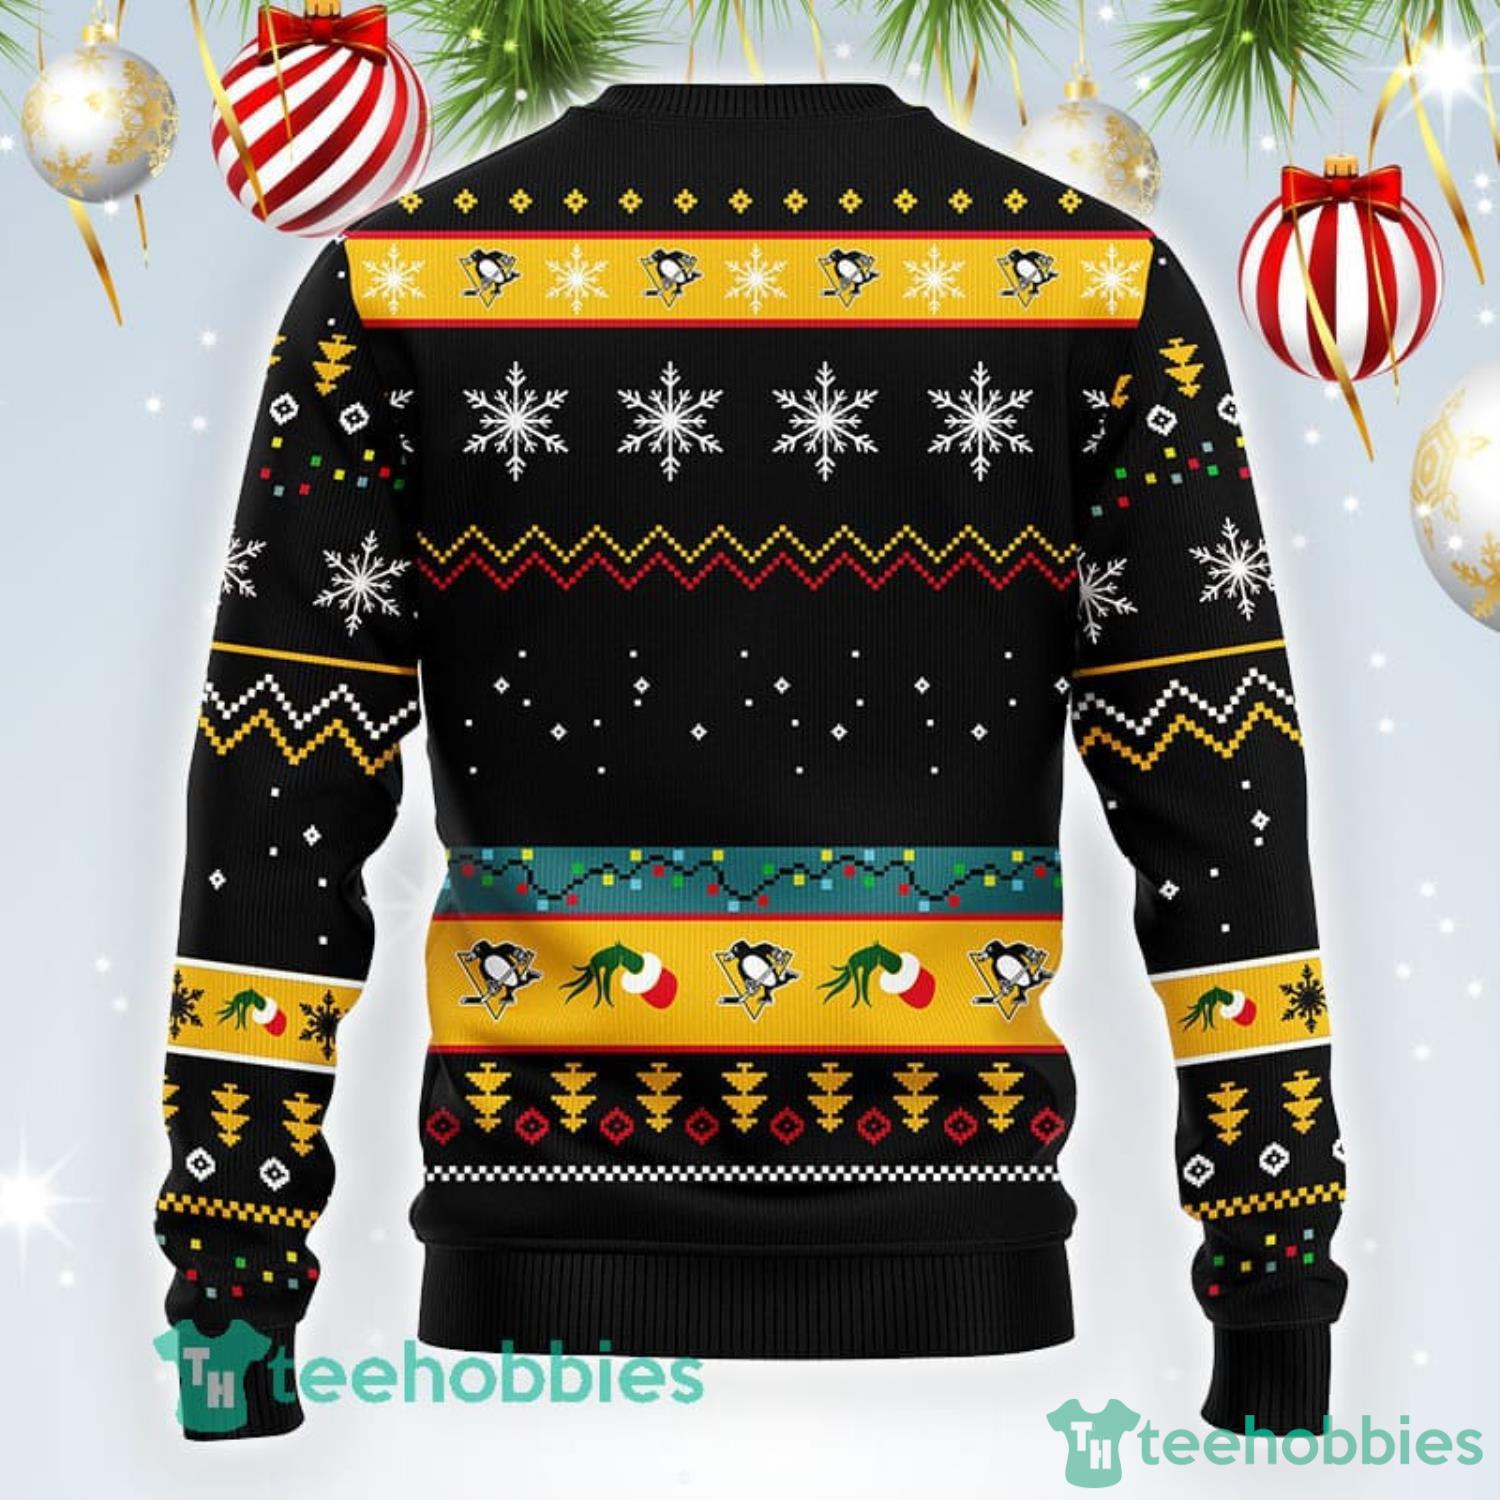 Pittsburgh Penguins Mens Shirts, Sweaters, Penguins Ugly Sweaters, Dress  Shirts